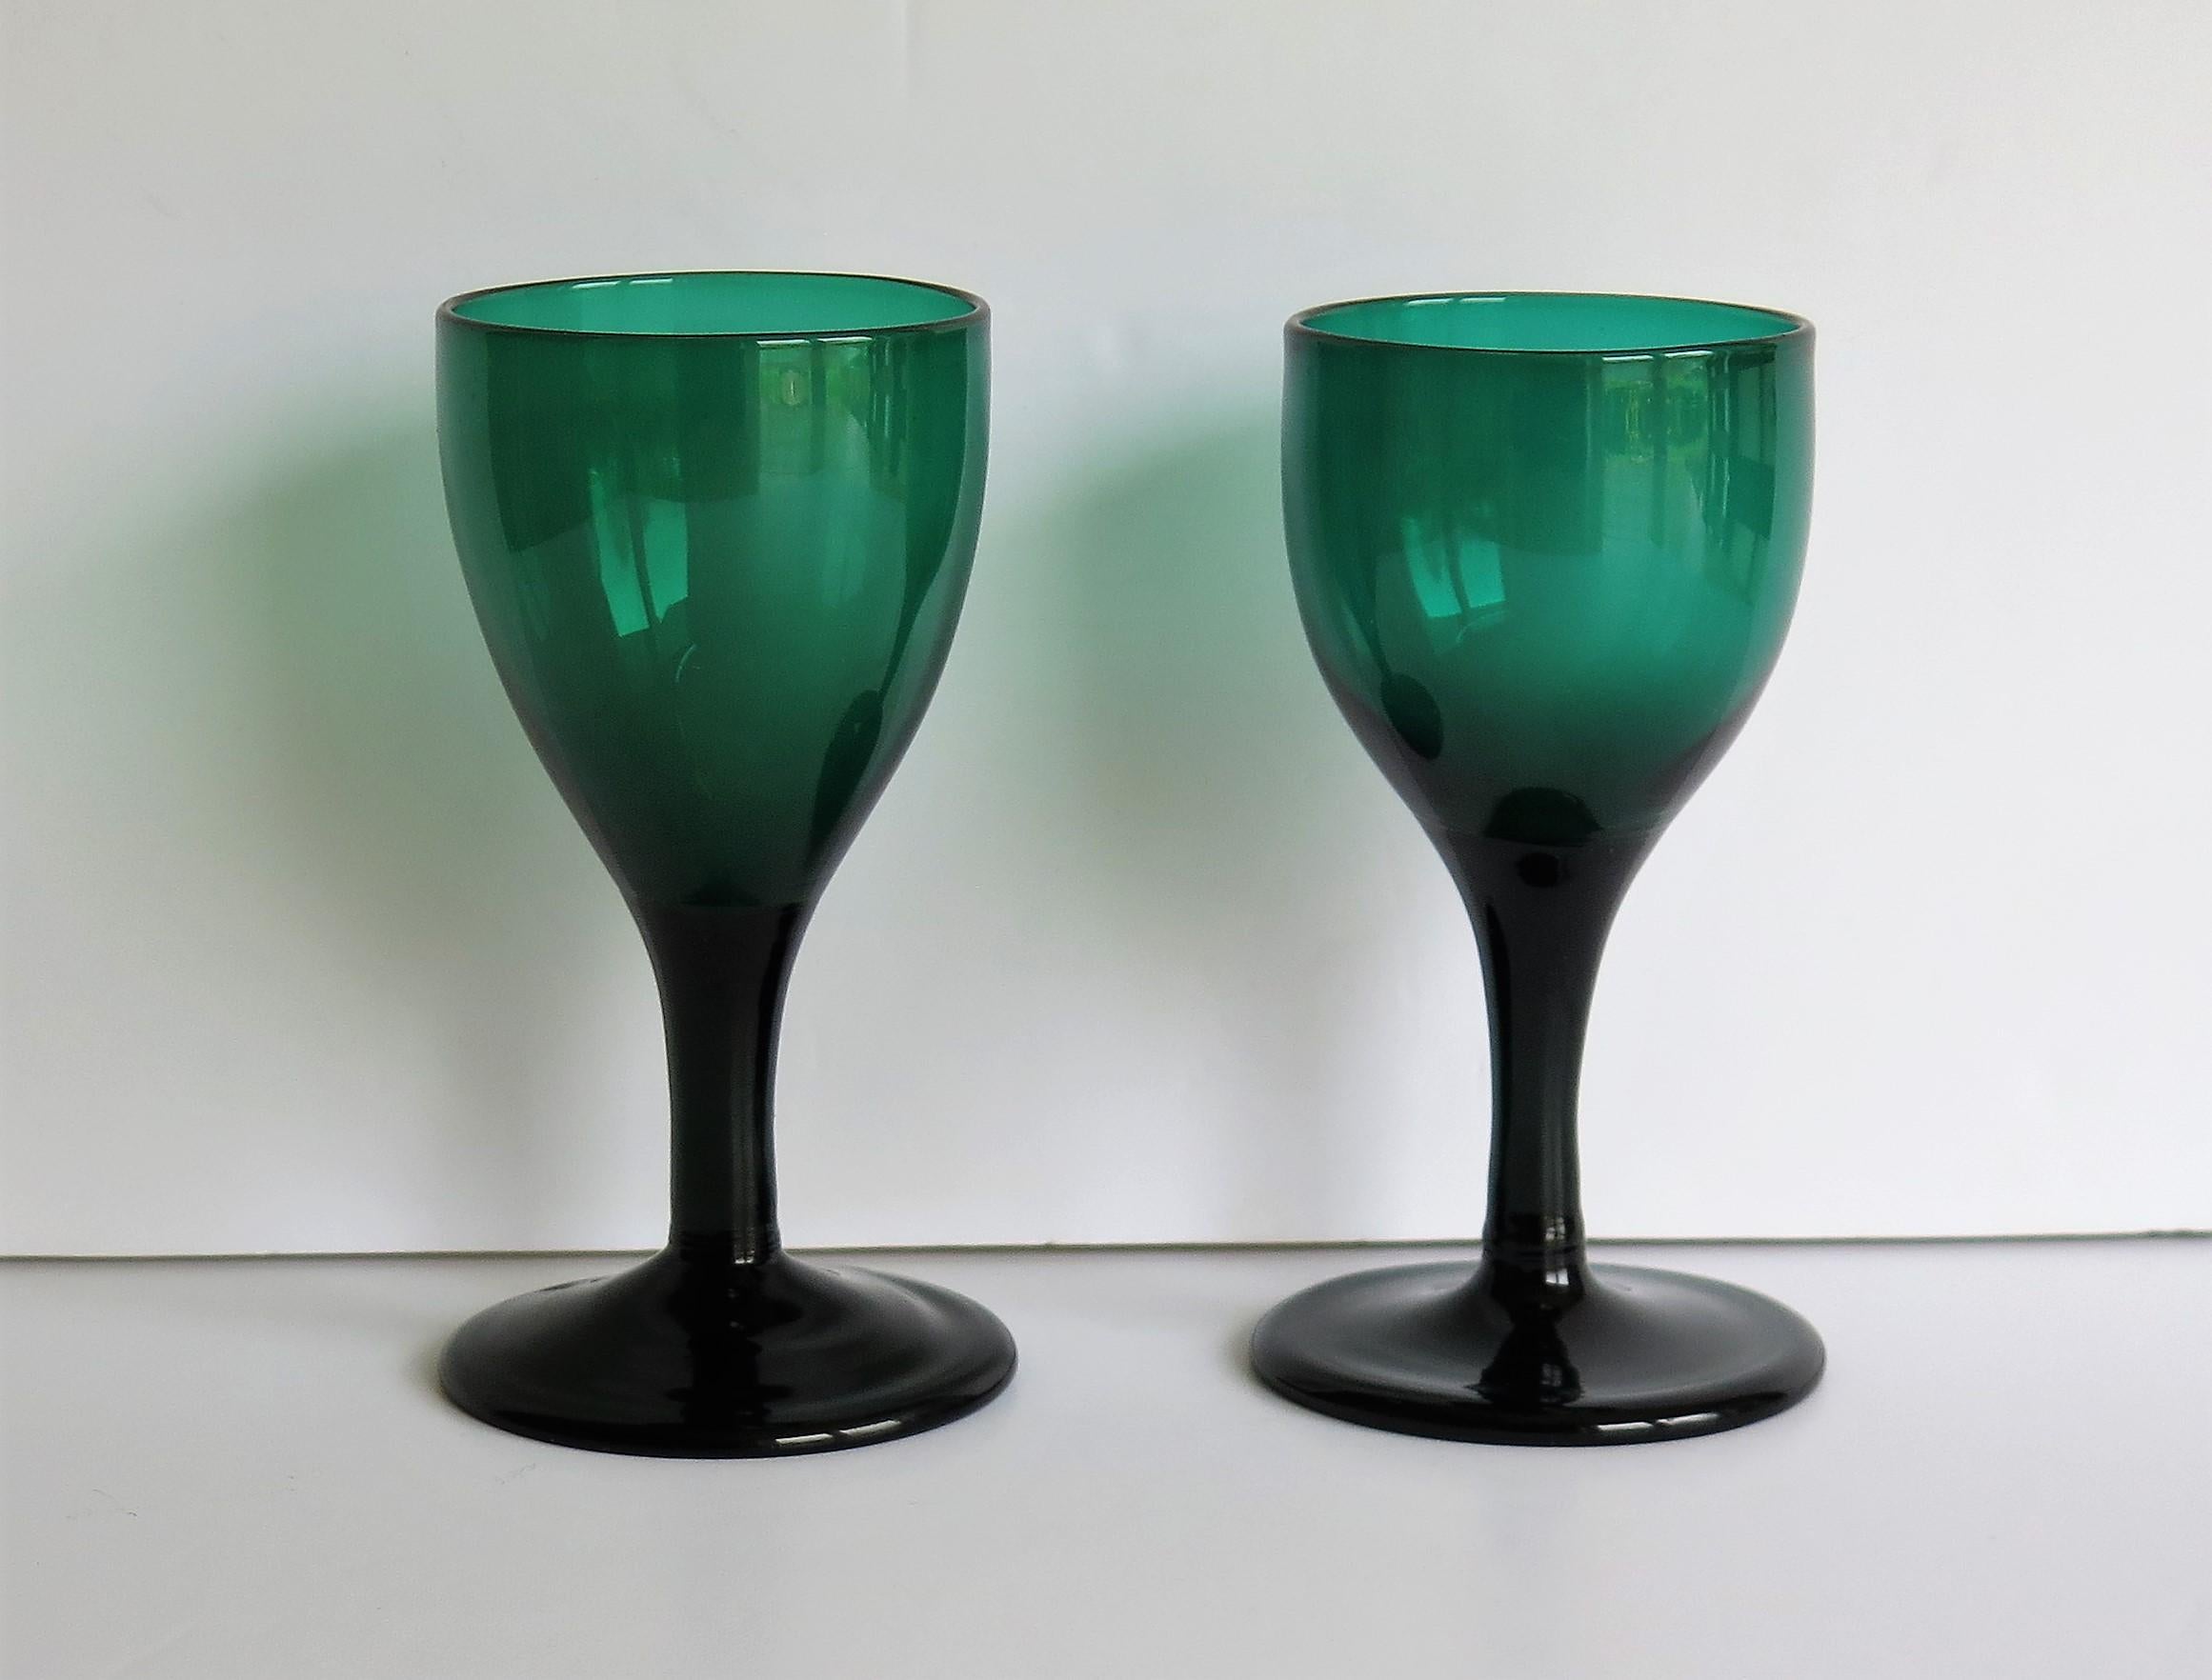 These are two ( very close pair) of good English wine glasses, hand blown, Bristol Green, lead glass, from the late 18th century, George 111rd period, circa 1790.

Each glass has a drawn tulip bowl which gradually tapers to form a plain solid stem,